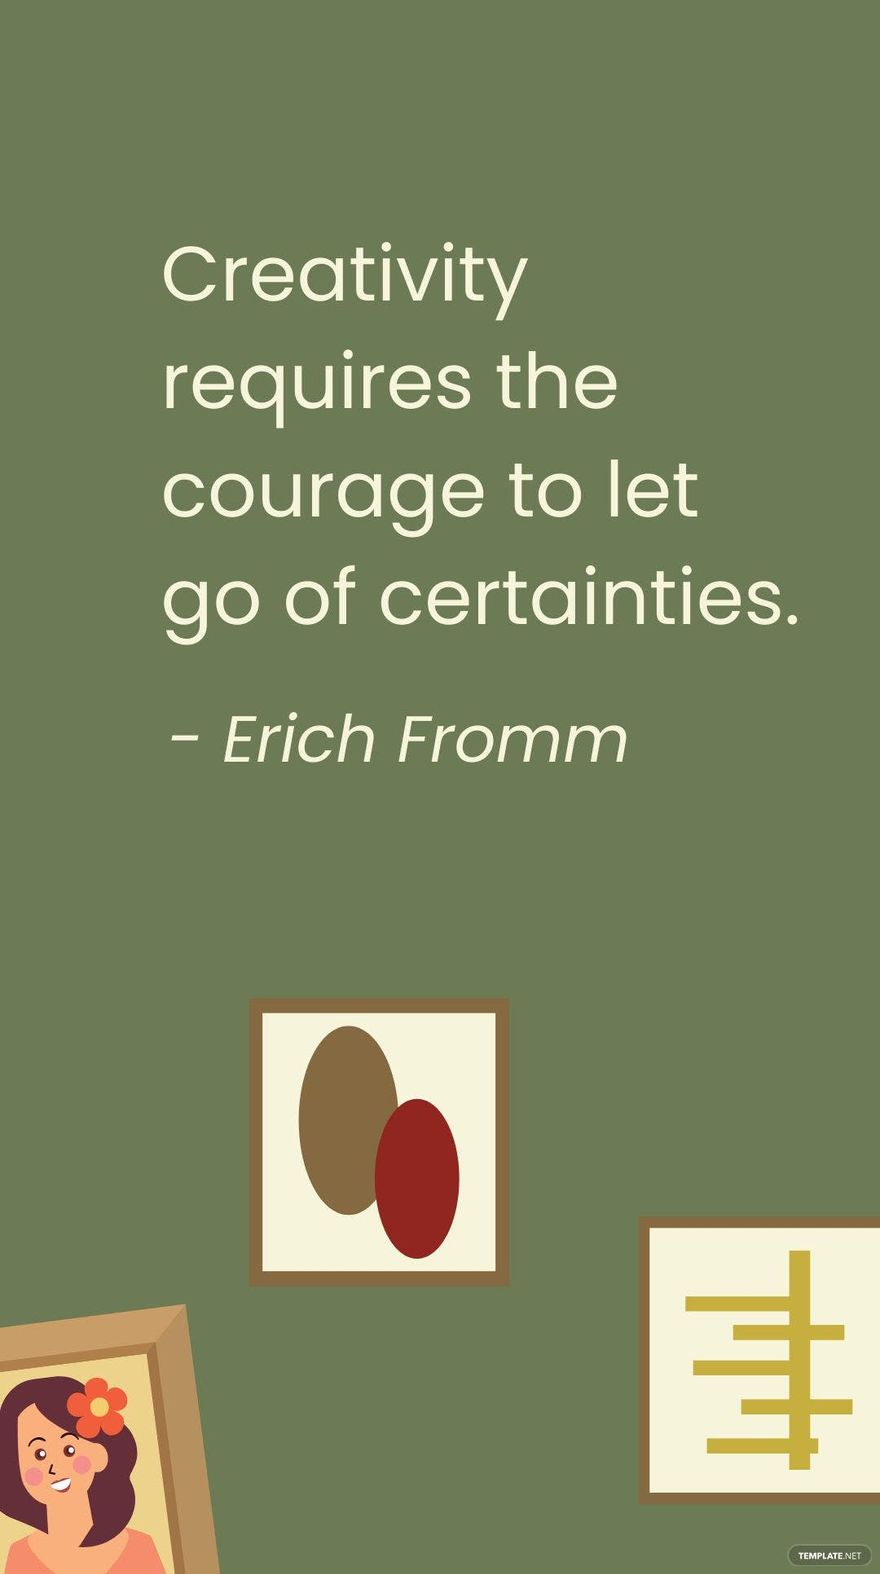 Free Erich Fromm - Creativity requires the courage to let go of certainties.